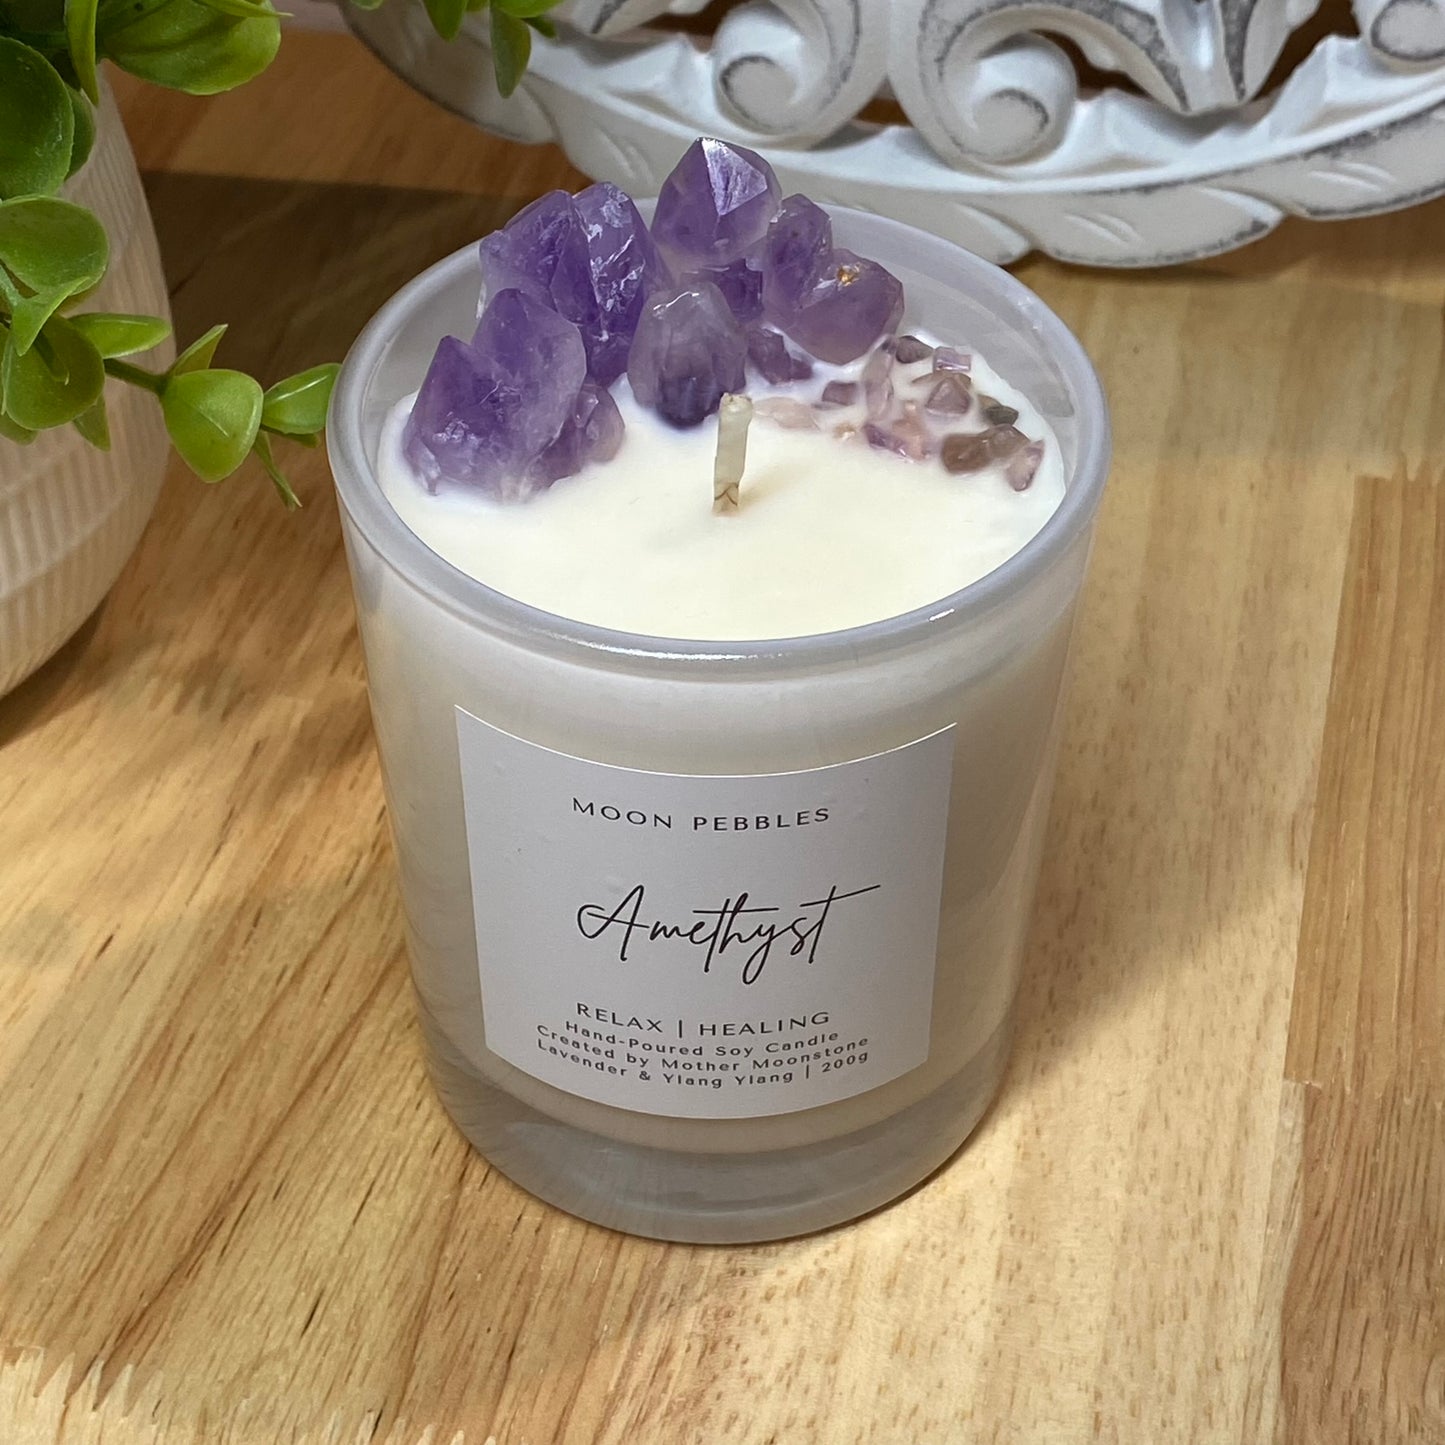 Amethyst Crystal Candle - Relaxation & Healing